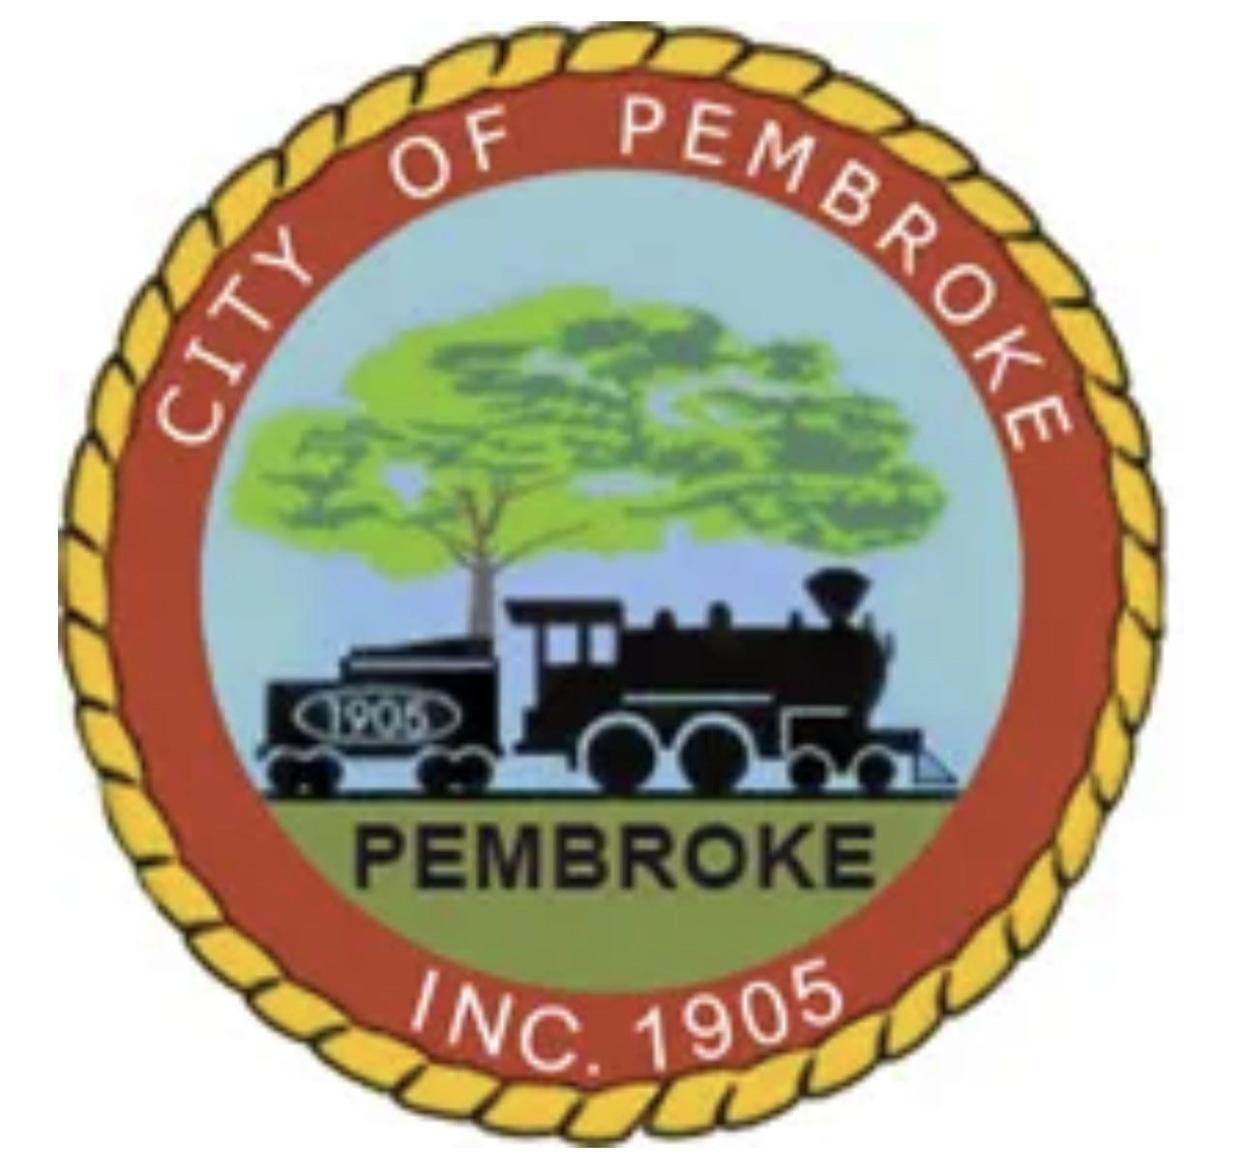 The city of Pembroke terminated a school resource officer upon learning about communication he had with a student.